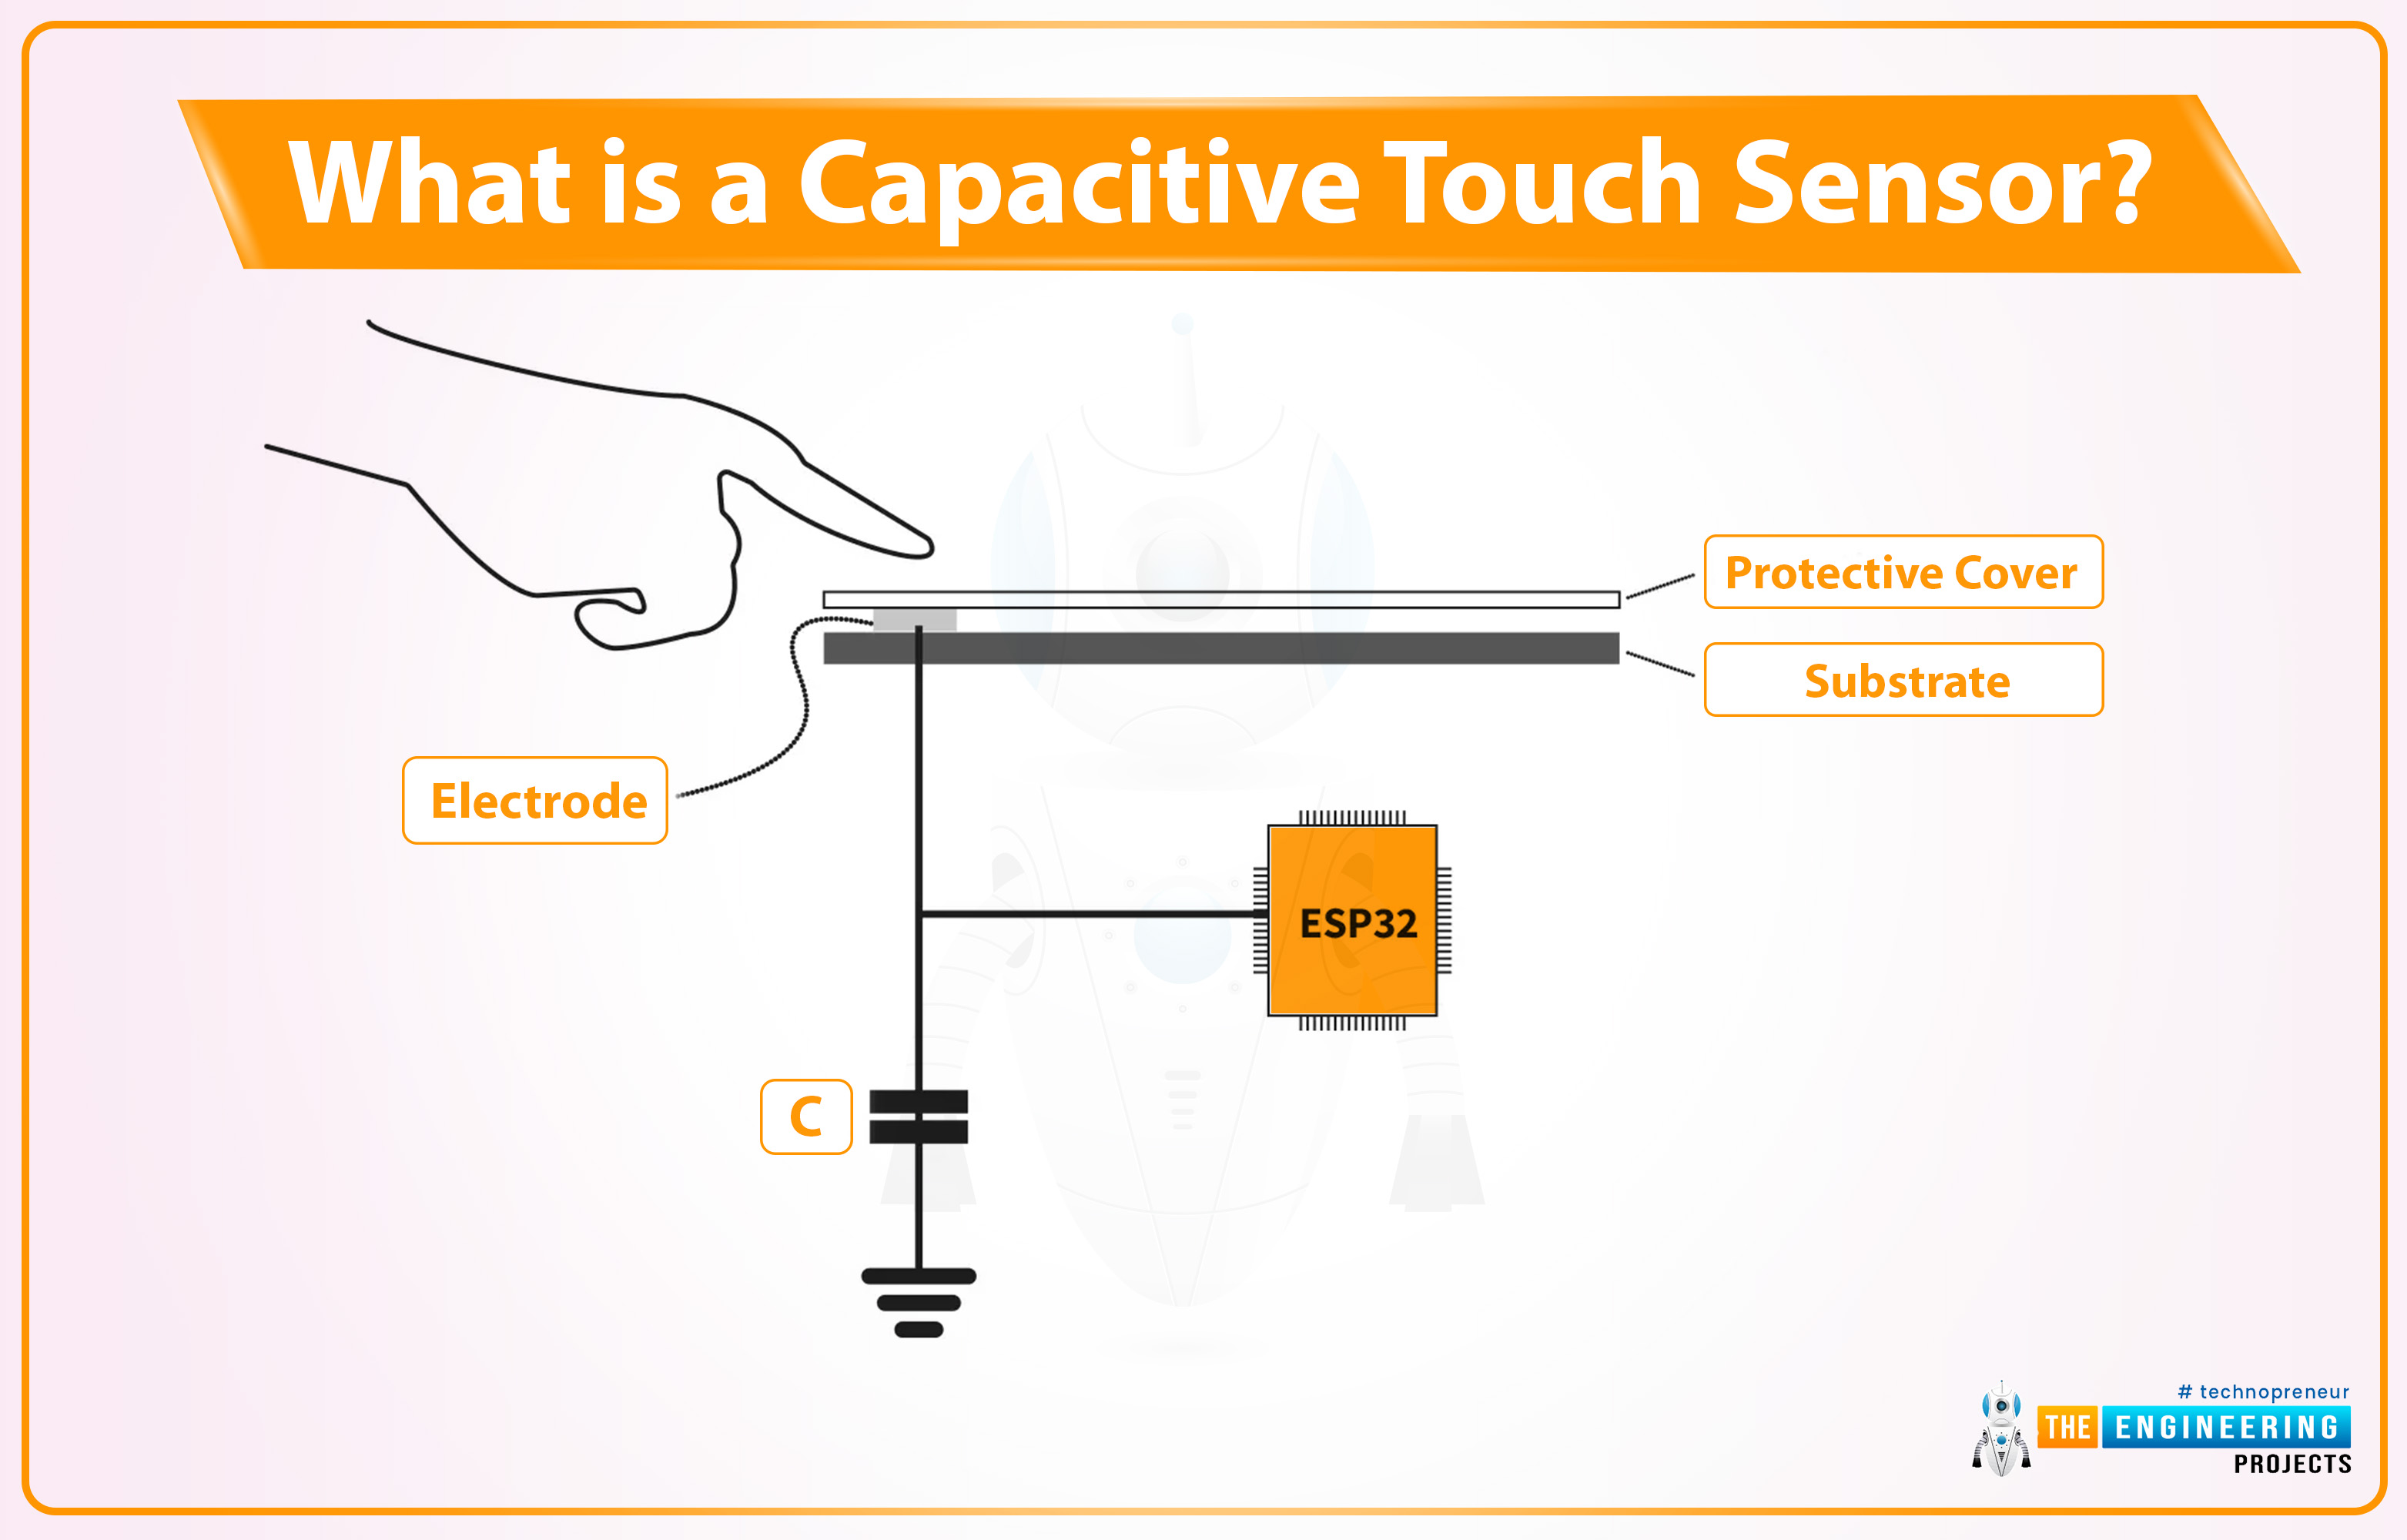 ESP32 capacitive touch sensor, What is a capacitive touch sensor, Capacitive touch sensor in ESP32, Programming capacitive sensor in ESP32, ESP32 touch sensor, ESP32 touch pins, touch pins in esp32, external interrupt with touch in esp32